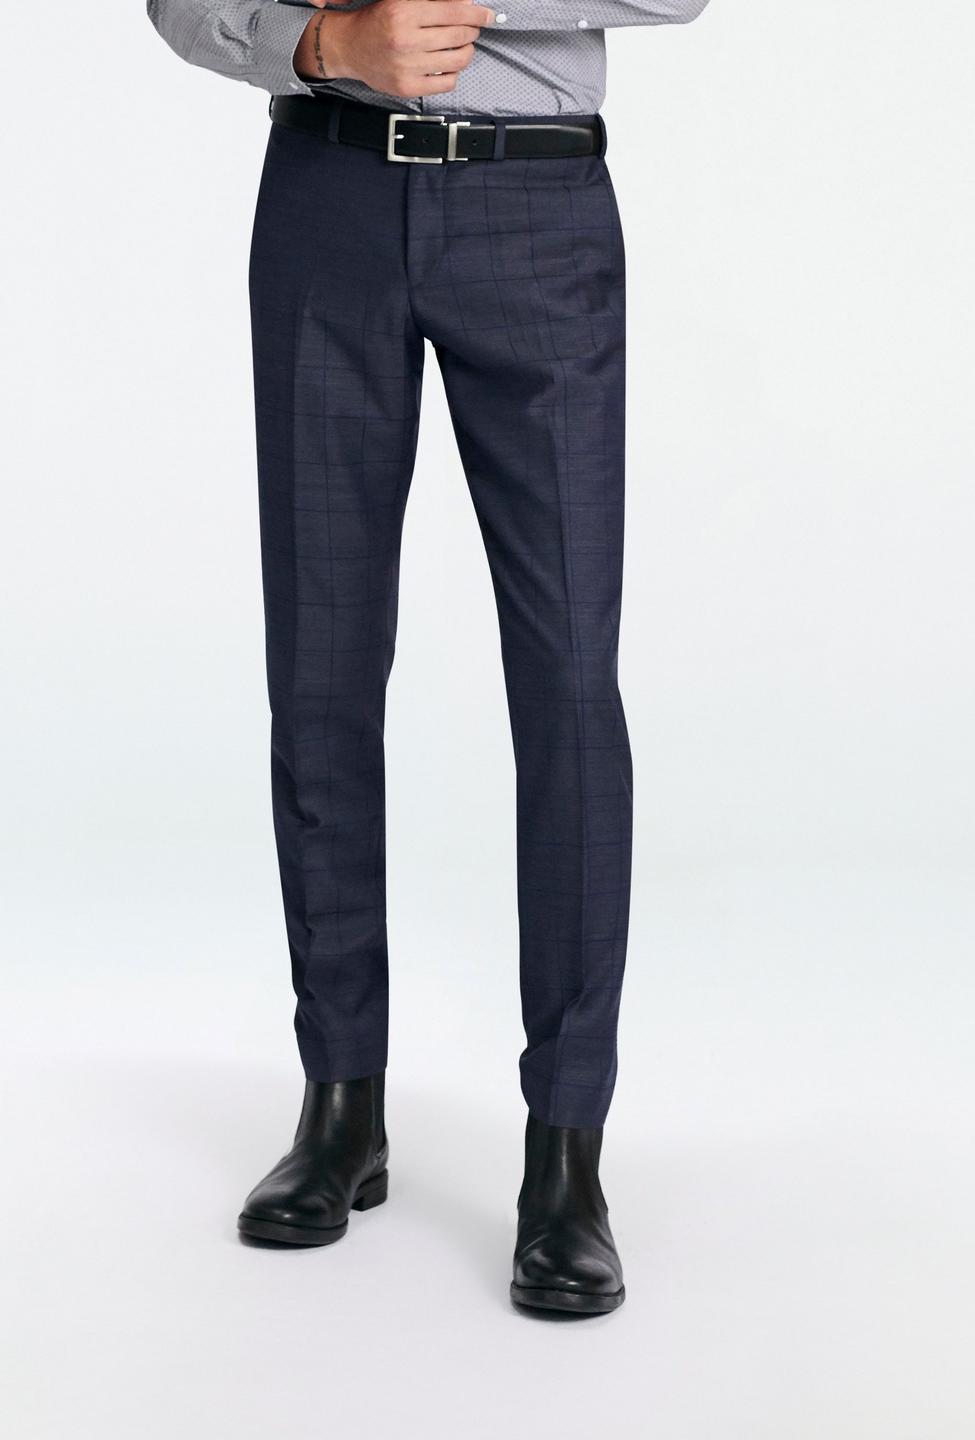 Gray pants - Carnforth Checked Design from Seasonal Indochino Collection